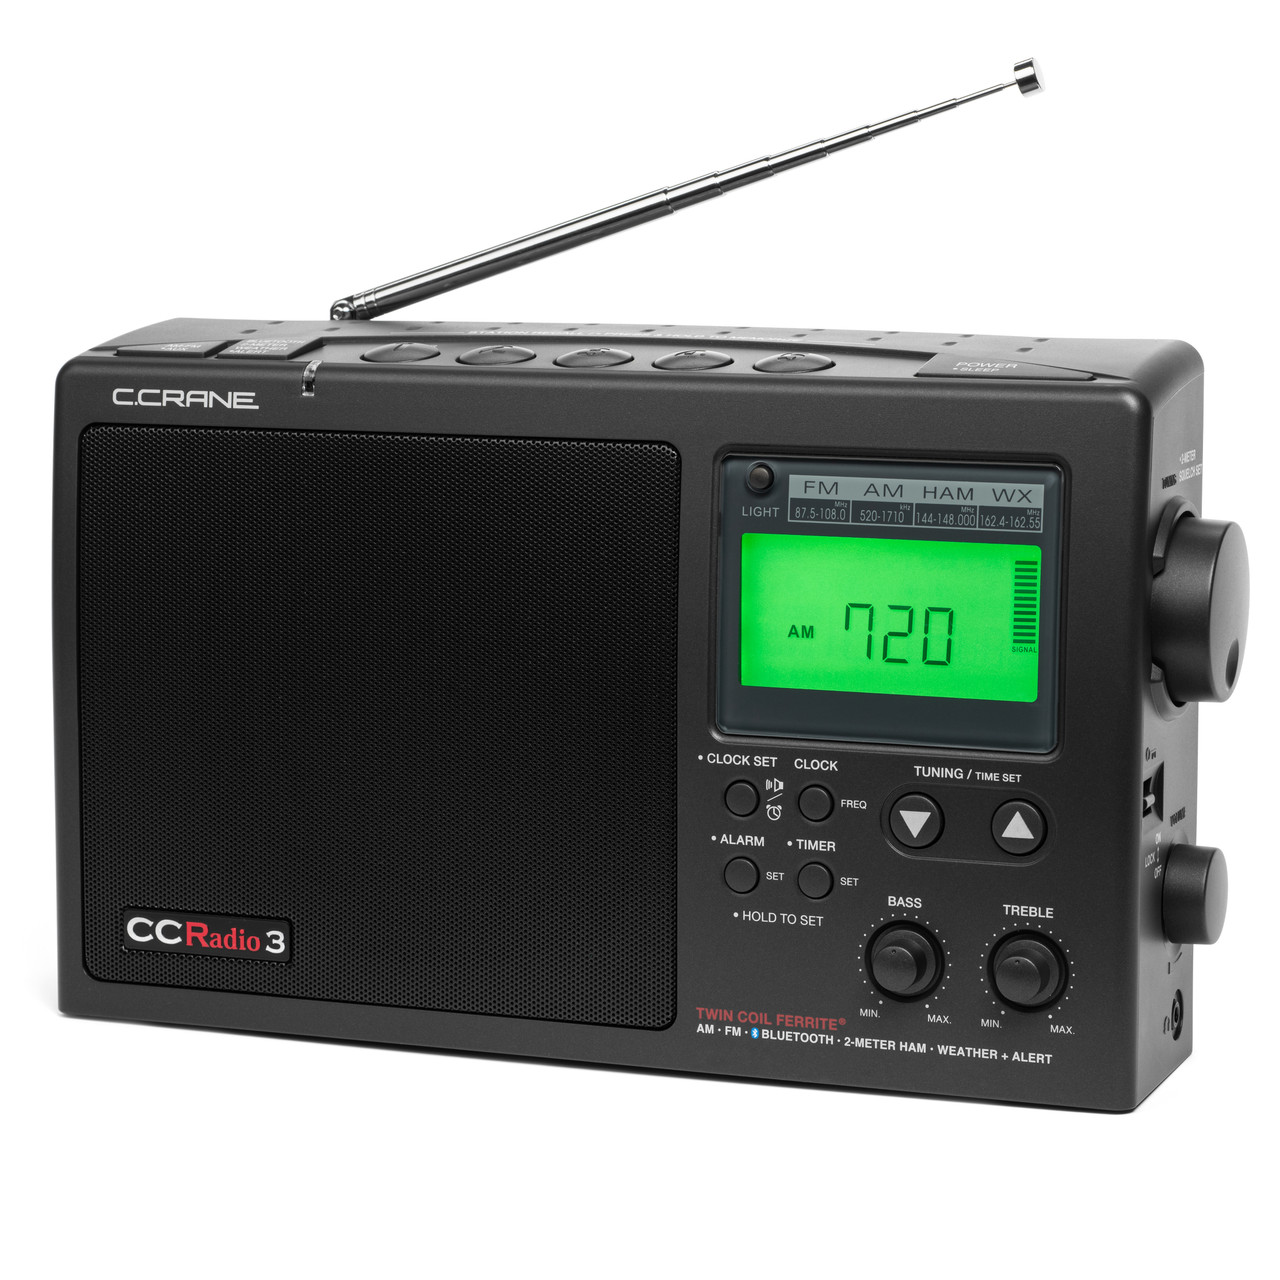 Orphan - CCRadio 3 AM/FM with Bluetooth, NOAA Weather, 2-Meter Ham